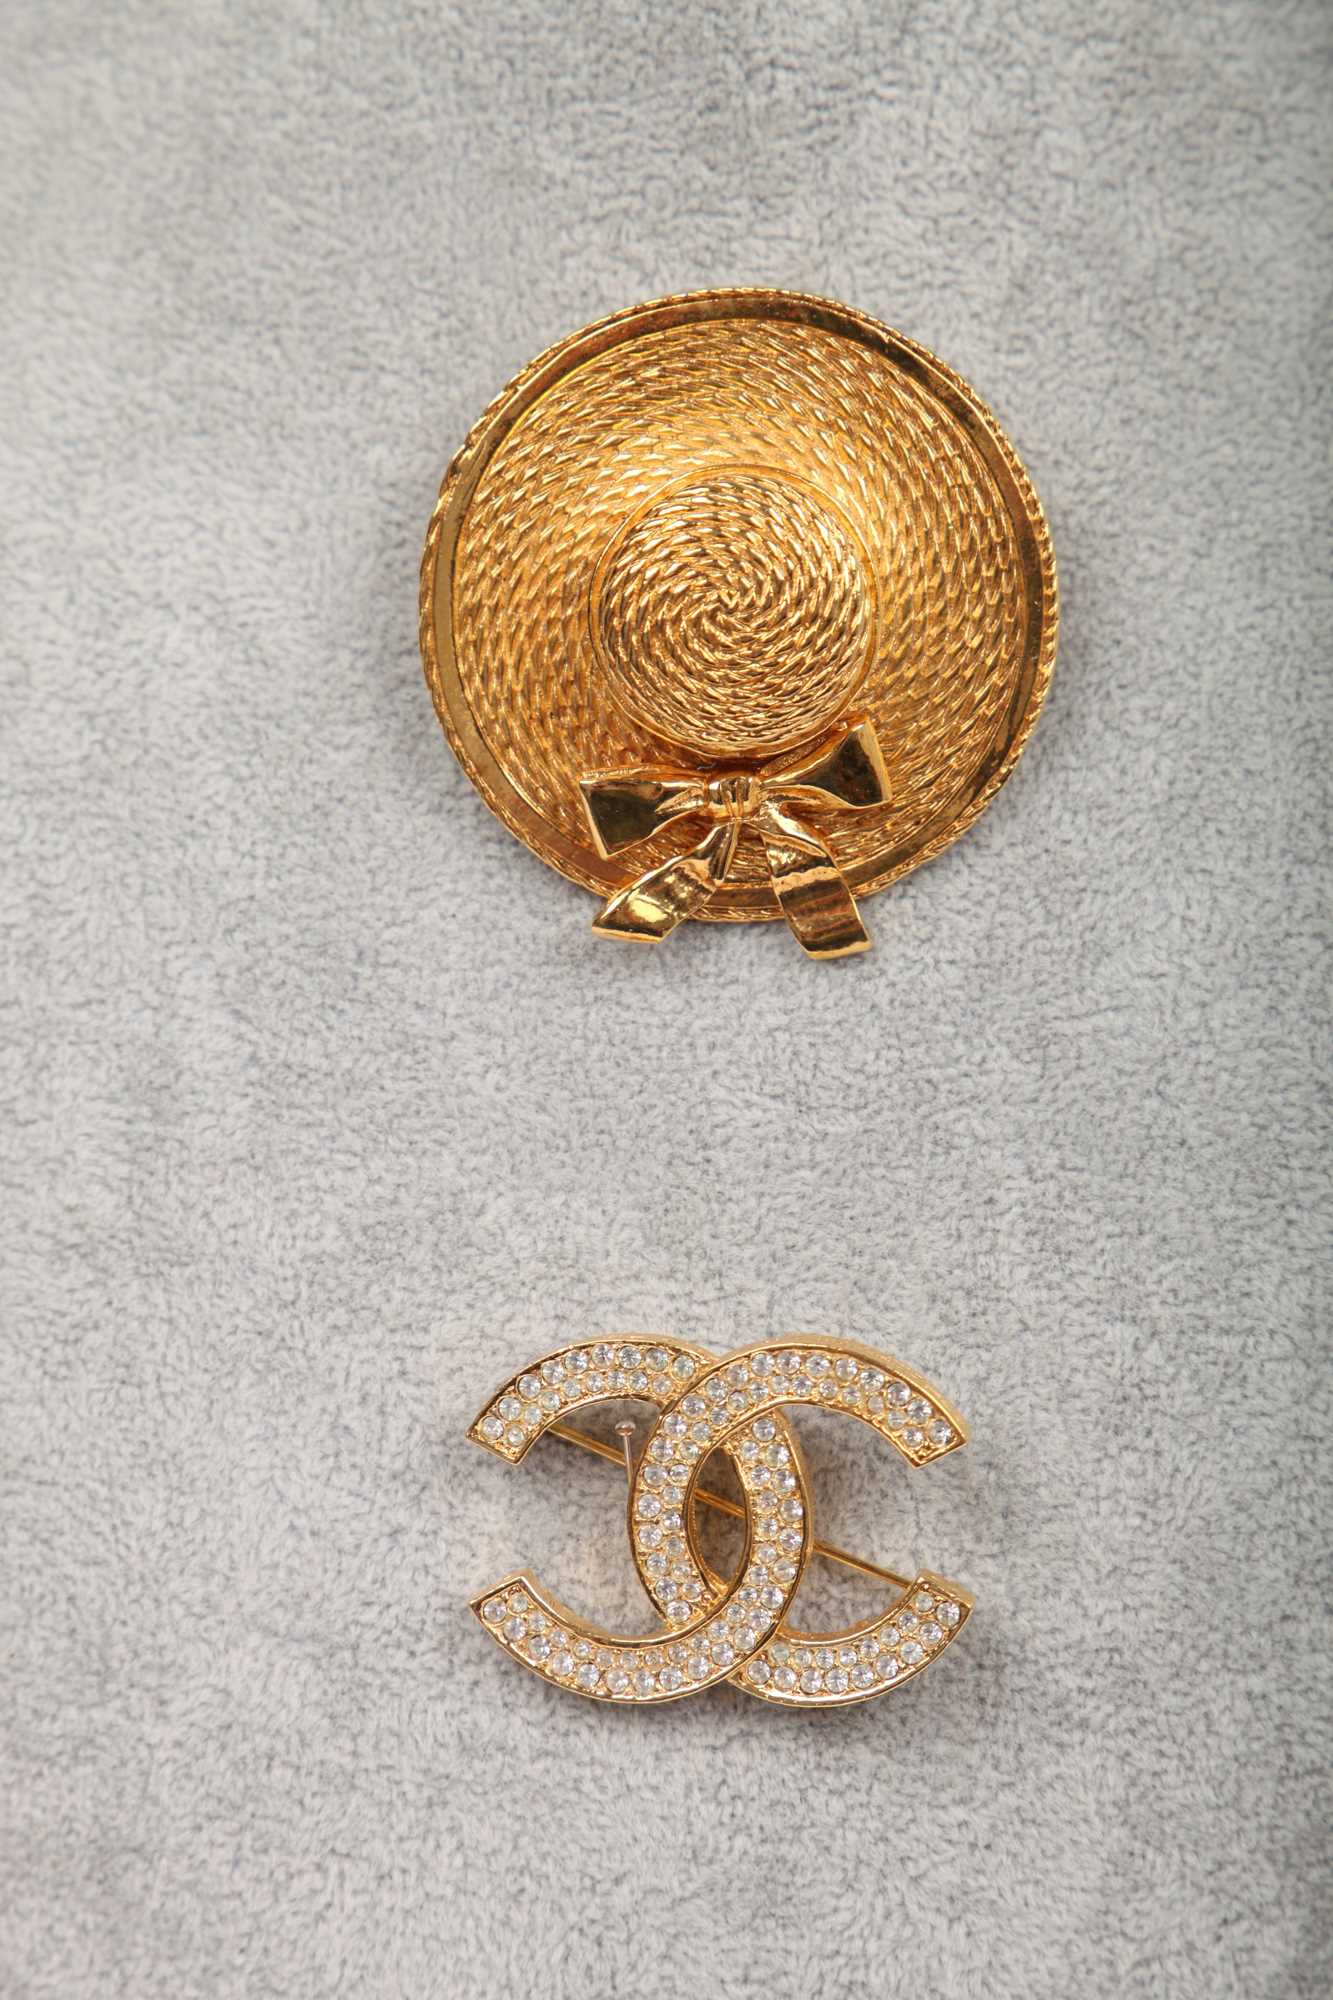 Lot 28 - Two Chanel gilt metal brooches, 1980s-early 1990s